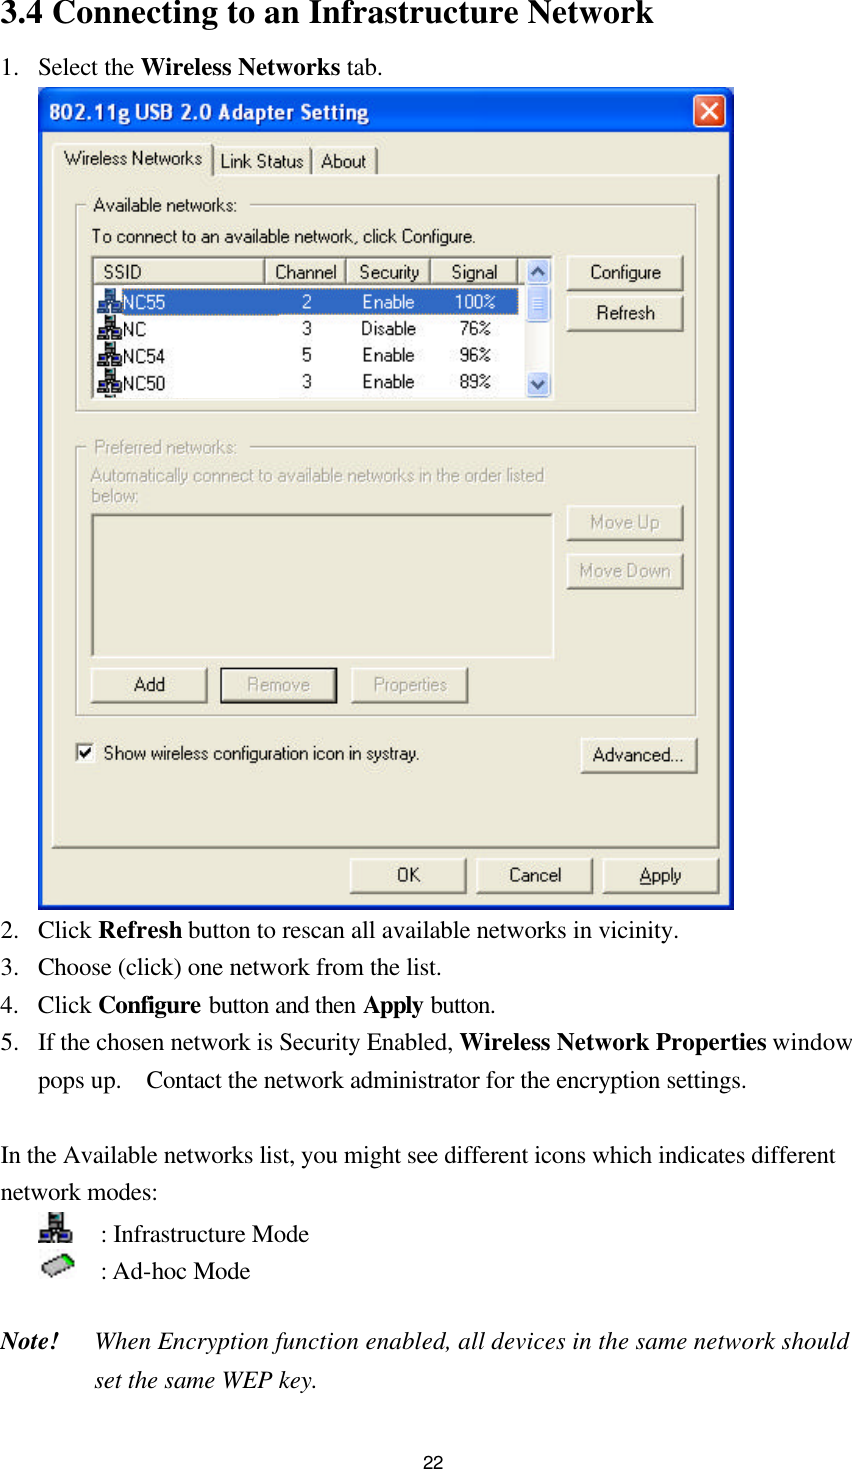  223.4 Connecting to an Infrastructure Network 1.  Select the Wireless Networks tab.   2.  Click Refresh button to rescan all available networks in vicinity. 3.  Choose (click) one network from the list. 4.  Click Configure button and then Apply button. 5.  If the chosen network is Security Enabled, Wireless Network Properties window pops up.  Contact the network administrator for the encryption settings.  In the Available networks list, you might see different icons which indicates different network modes:   : Infrastructure Mode     : Ad-hoc Mode    Note! When Encryption function enabled, all devices in the same network should set the same WEP key. 